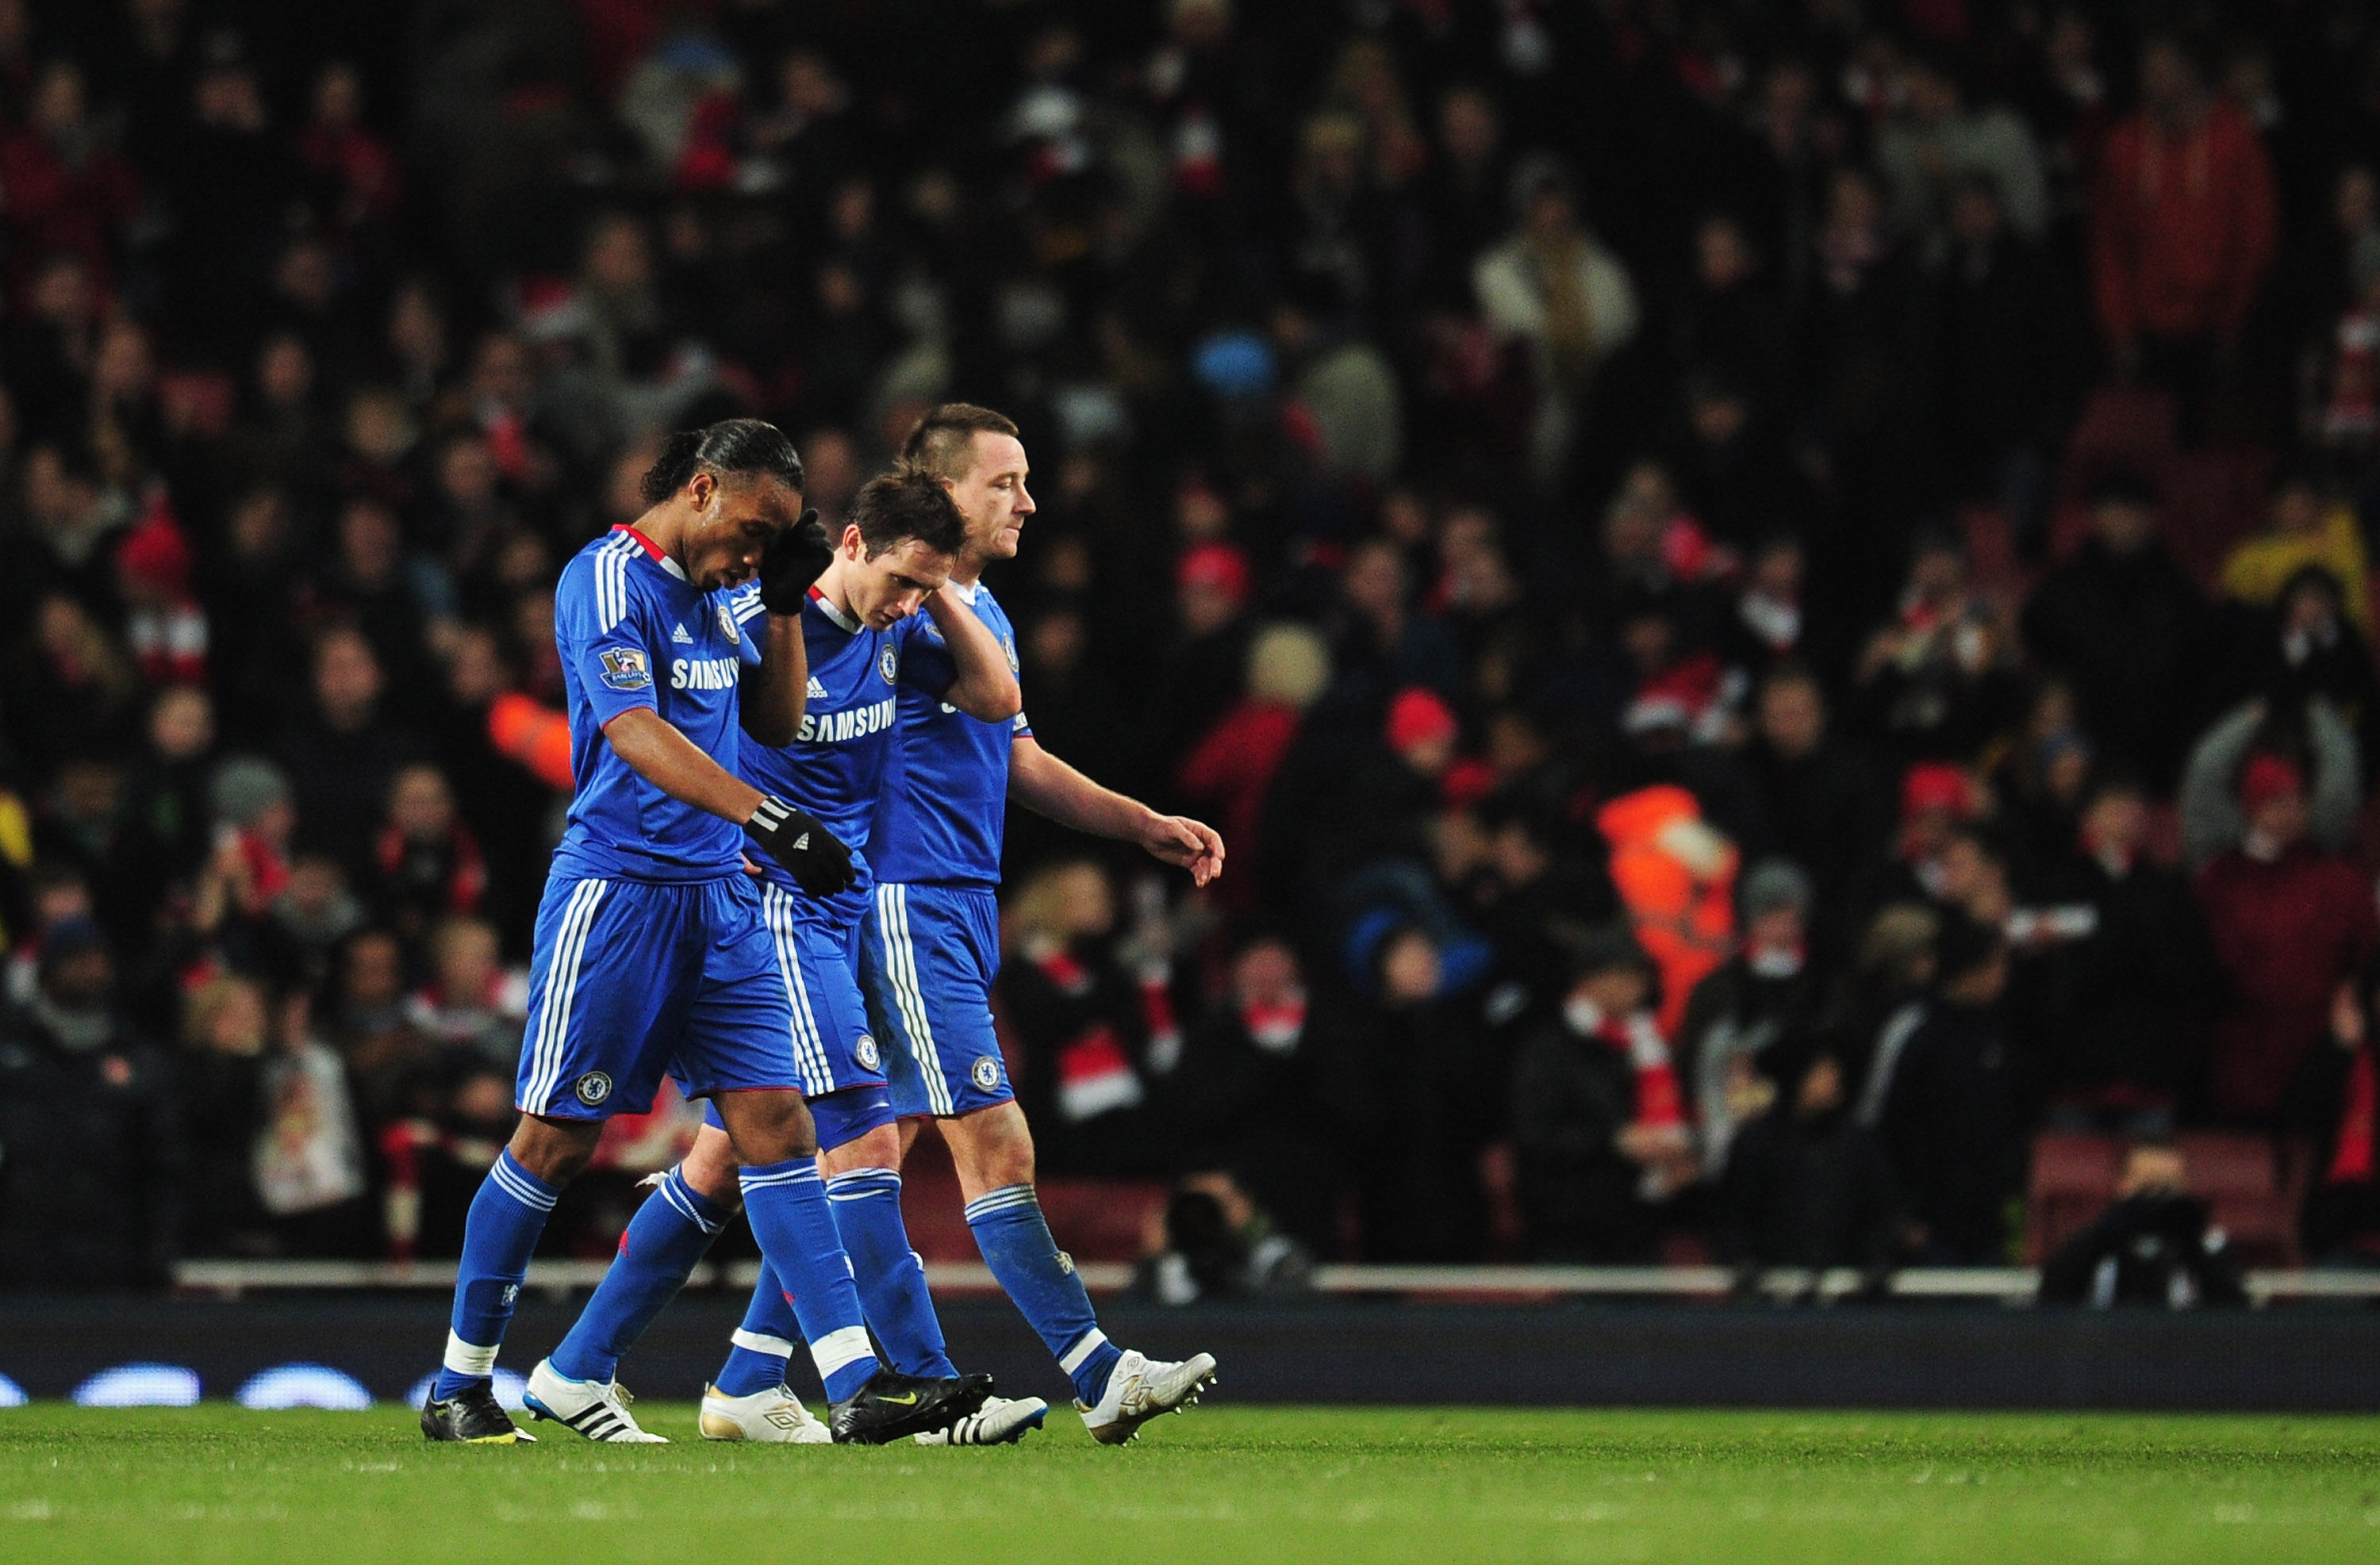 LONDON, ENGLAND - DECEMBER 27: (L-R) Didier Drogba, Frank Lampard and John Terry of Chelsea walk off dejected after the Barclays Premier League match between Arsenal and Chelsea at the Emirates Stadium on December 27, 2010 in London, England.  (Photo by S